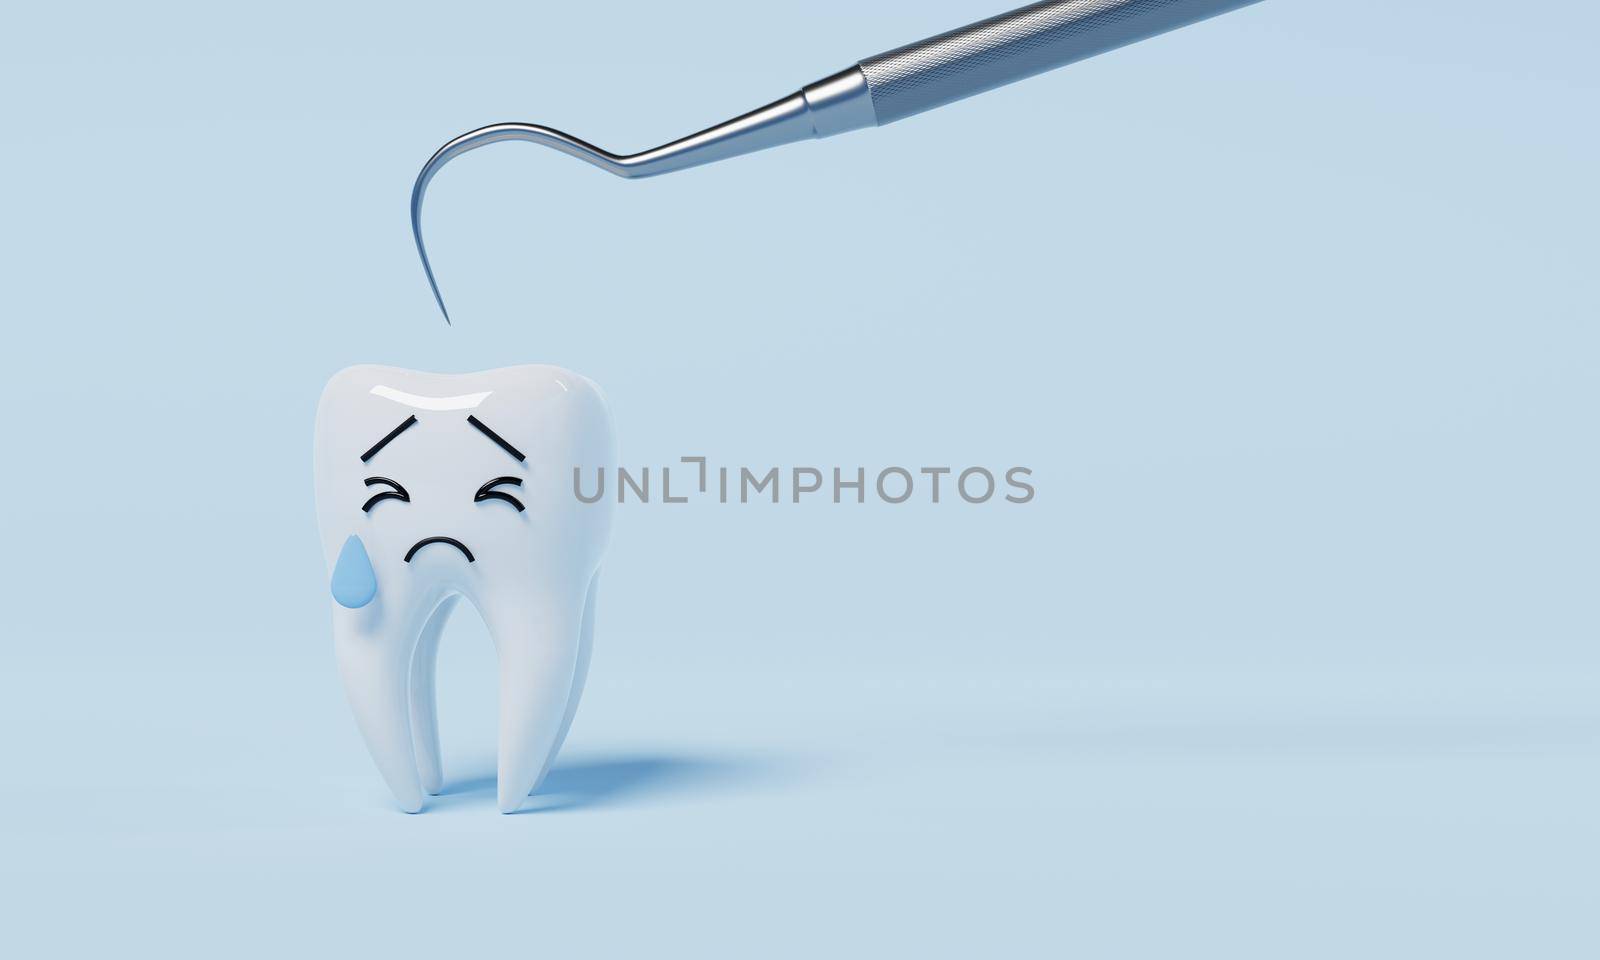 Tooth afraid of dental inspection hooks for yearly oral health check cause of tooth decay on blue background. Health care and medical concept. 3D illustration rendering